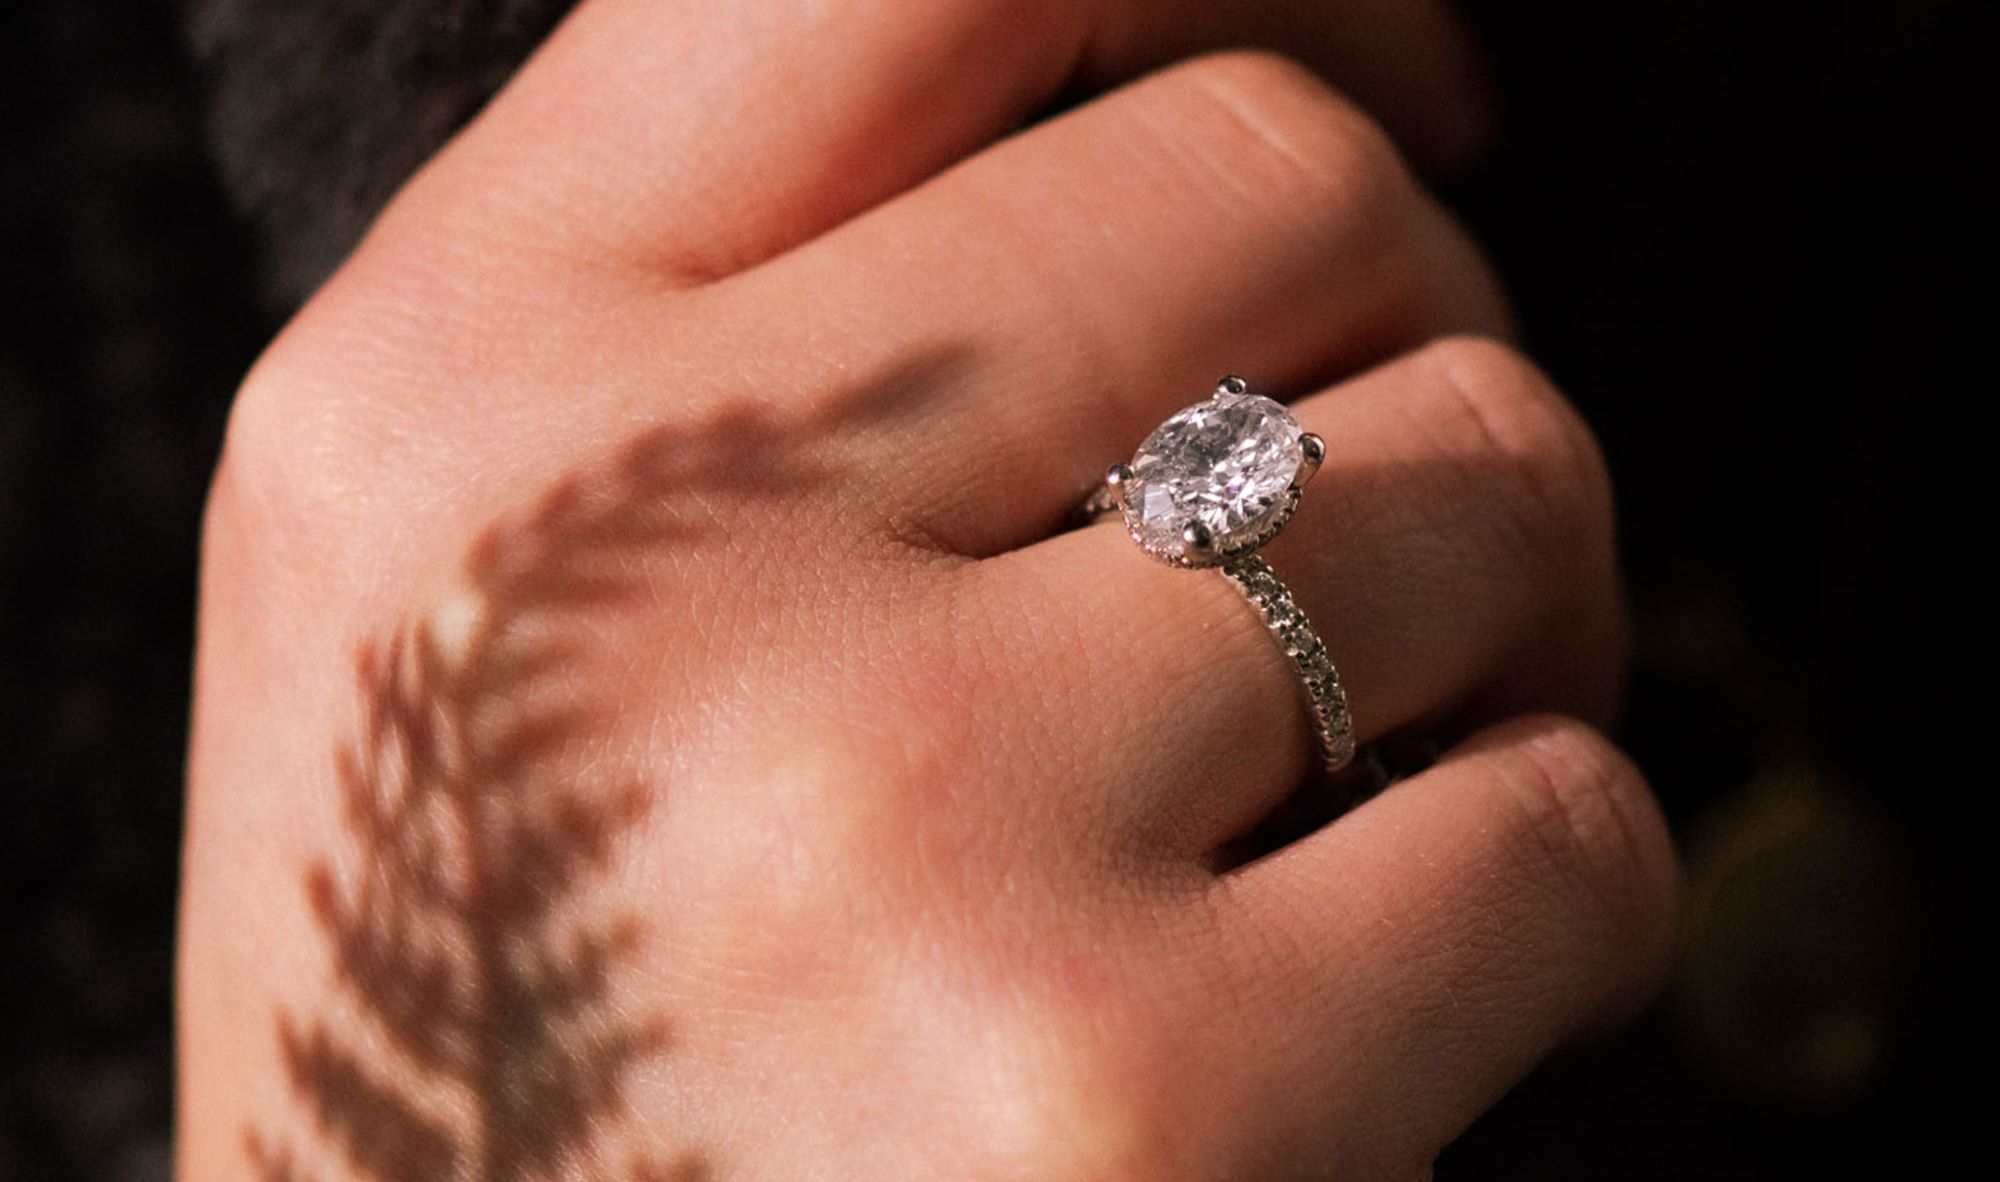 5 Things to Consider When Choosing a Lab Grown Diamond Engagement Ring